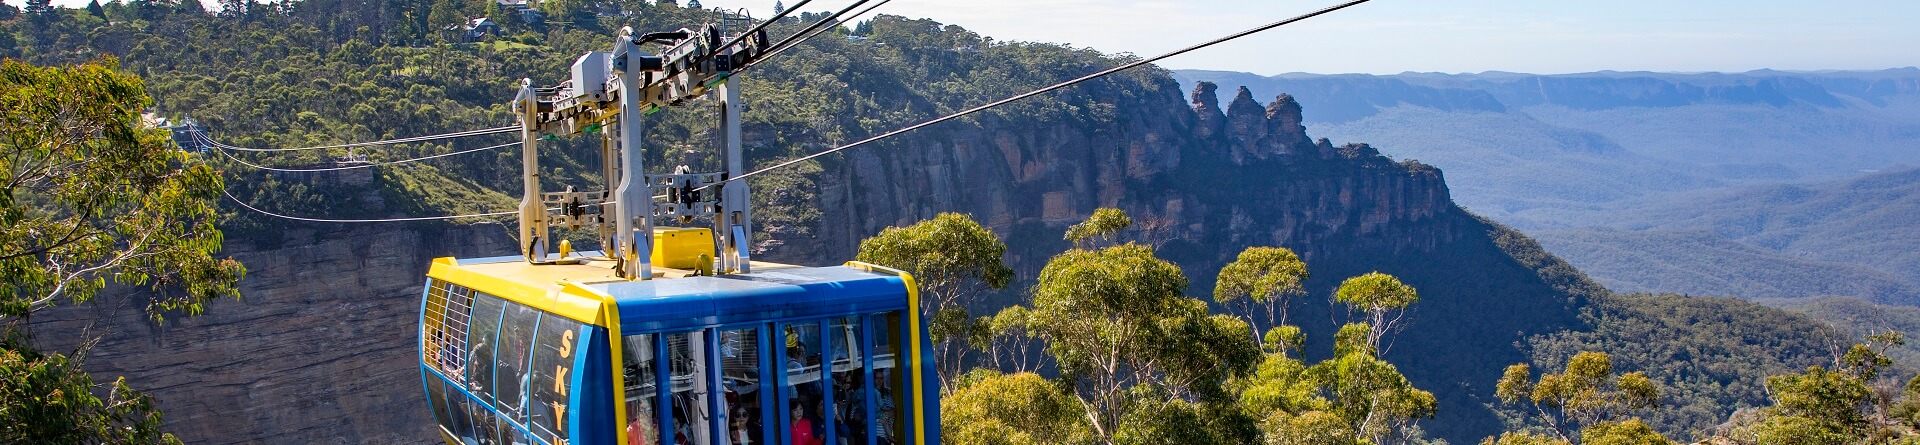 How much is the Blue Mountain cable car?